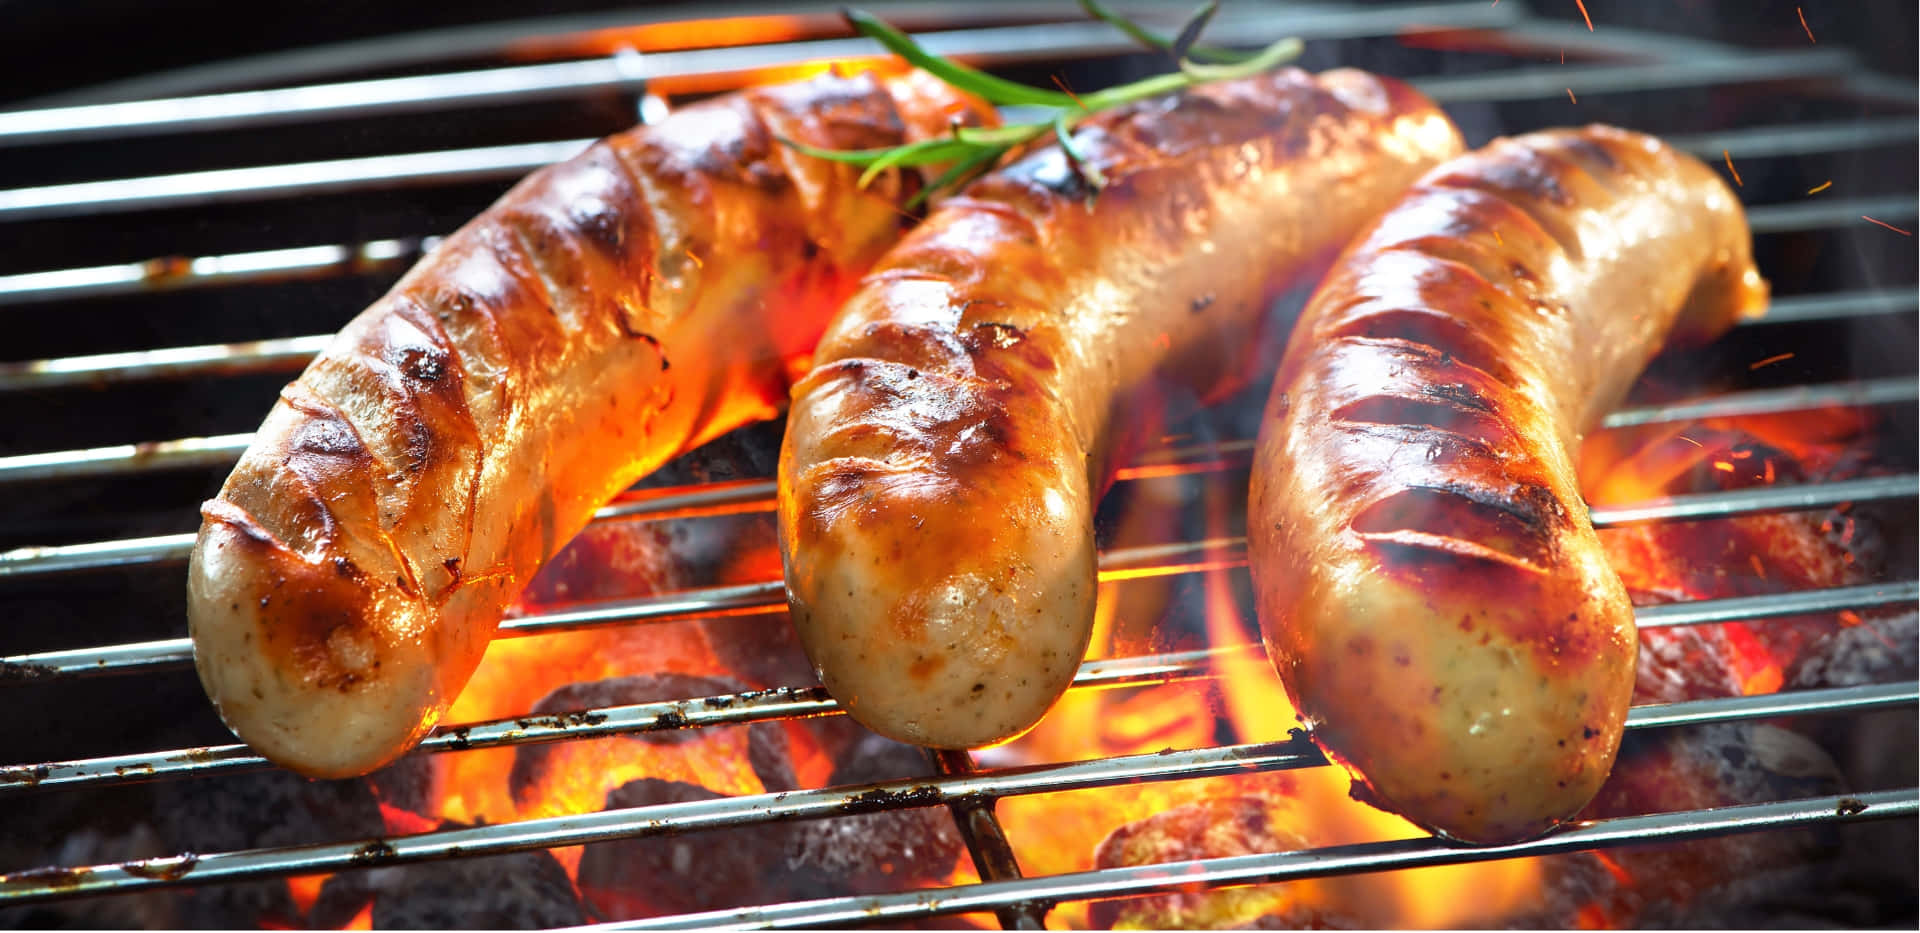 Sausages On A Grill With Flames